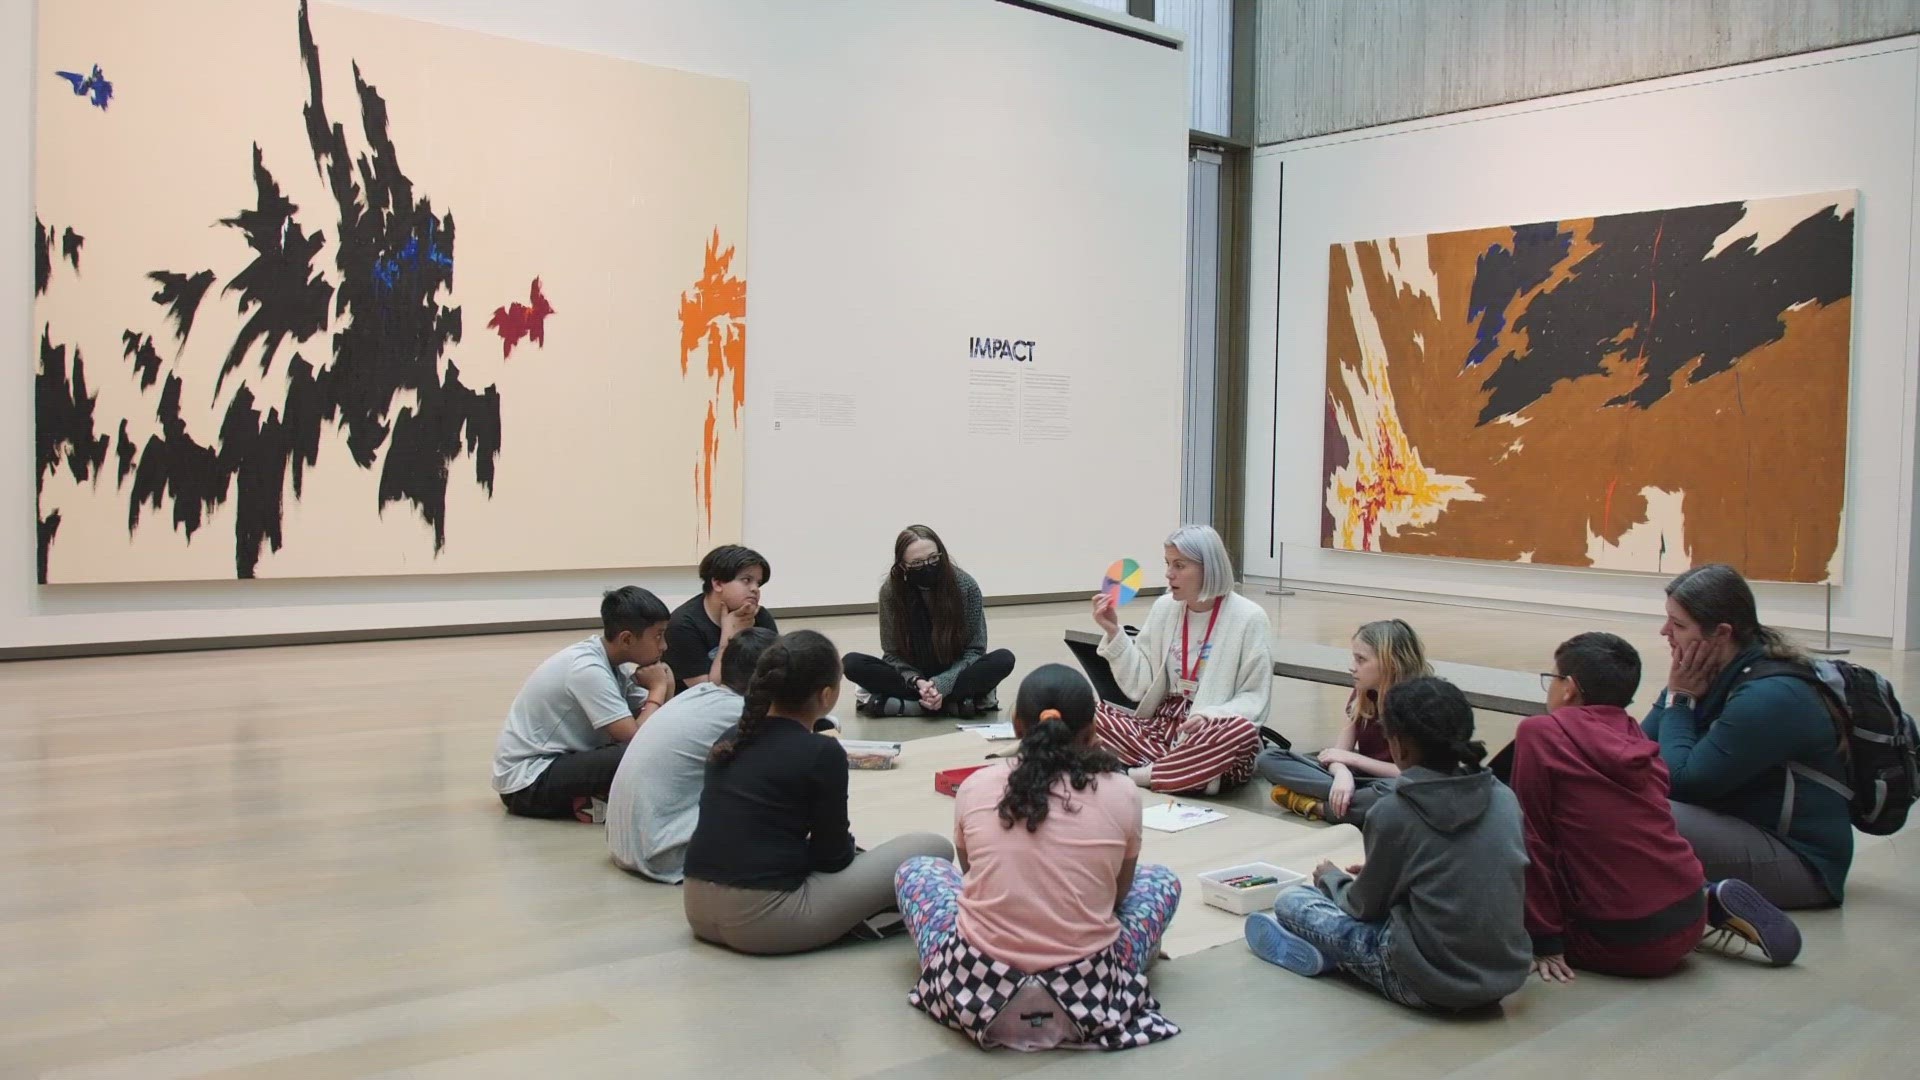 Since CSM's inStill School Experiences started, the museum has served more than 36,000 students from kindergarten to 12th grade.